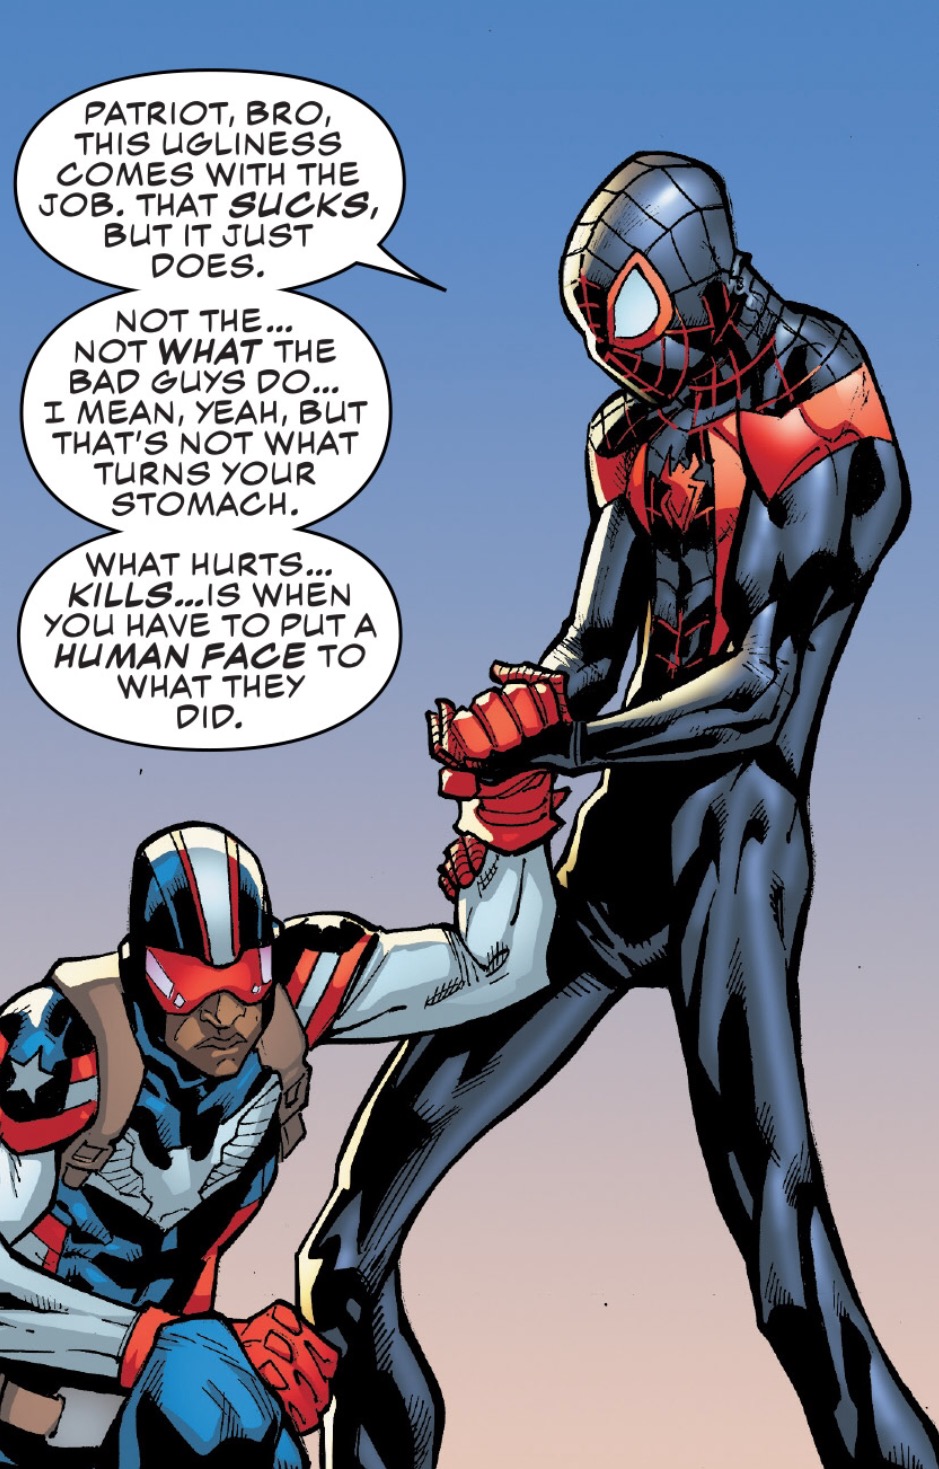 Spider Man and Patriot, from Champions #11